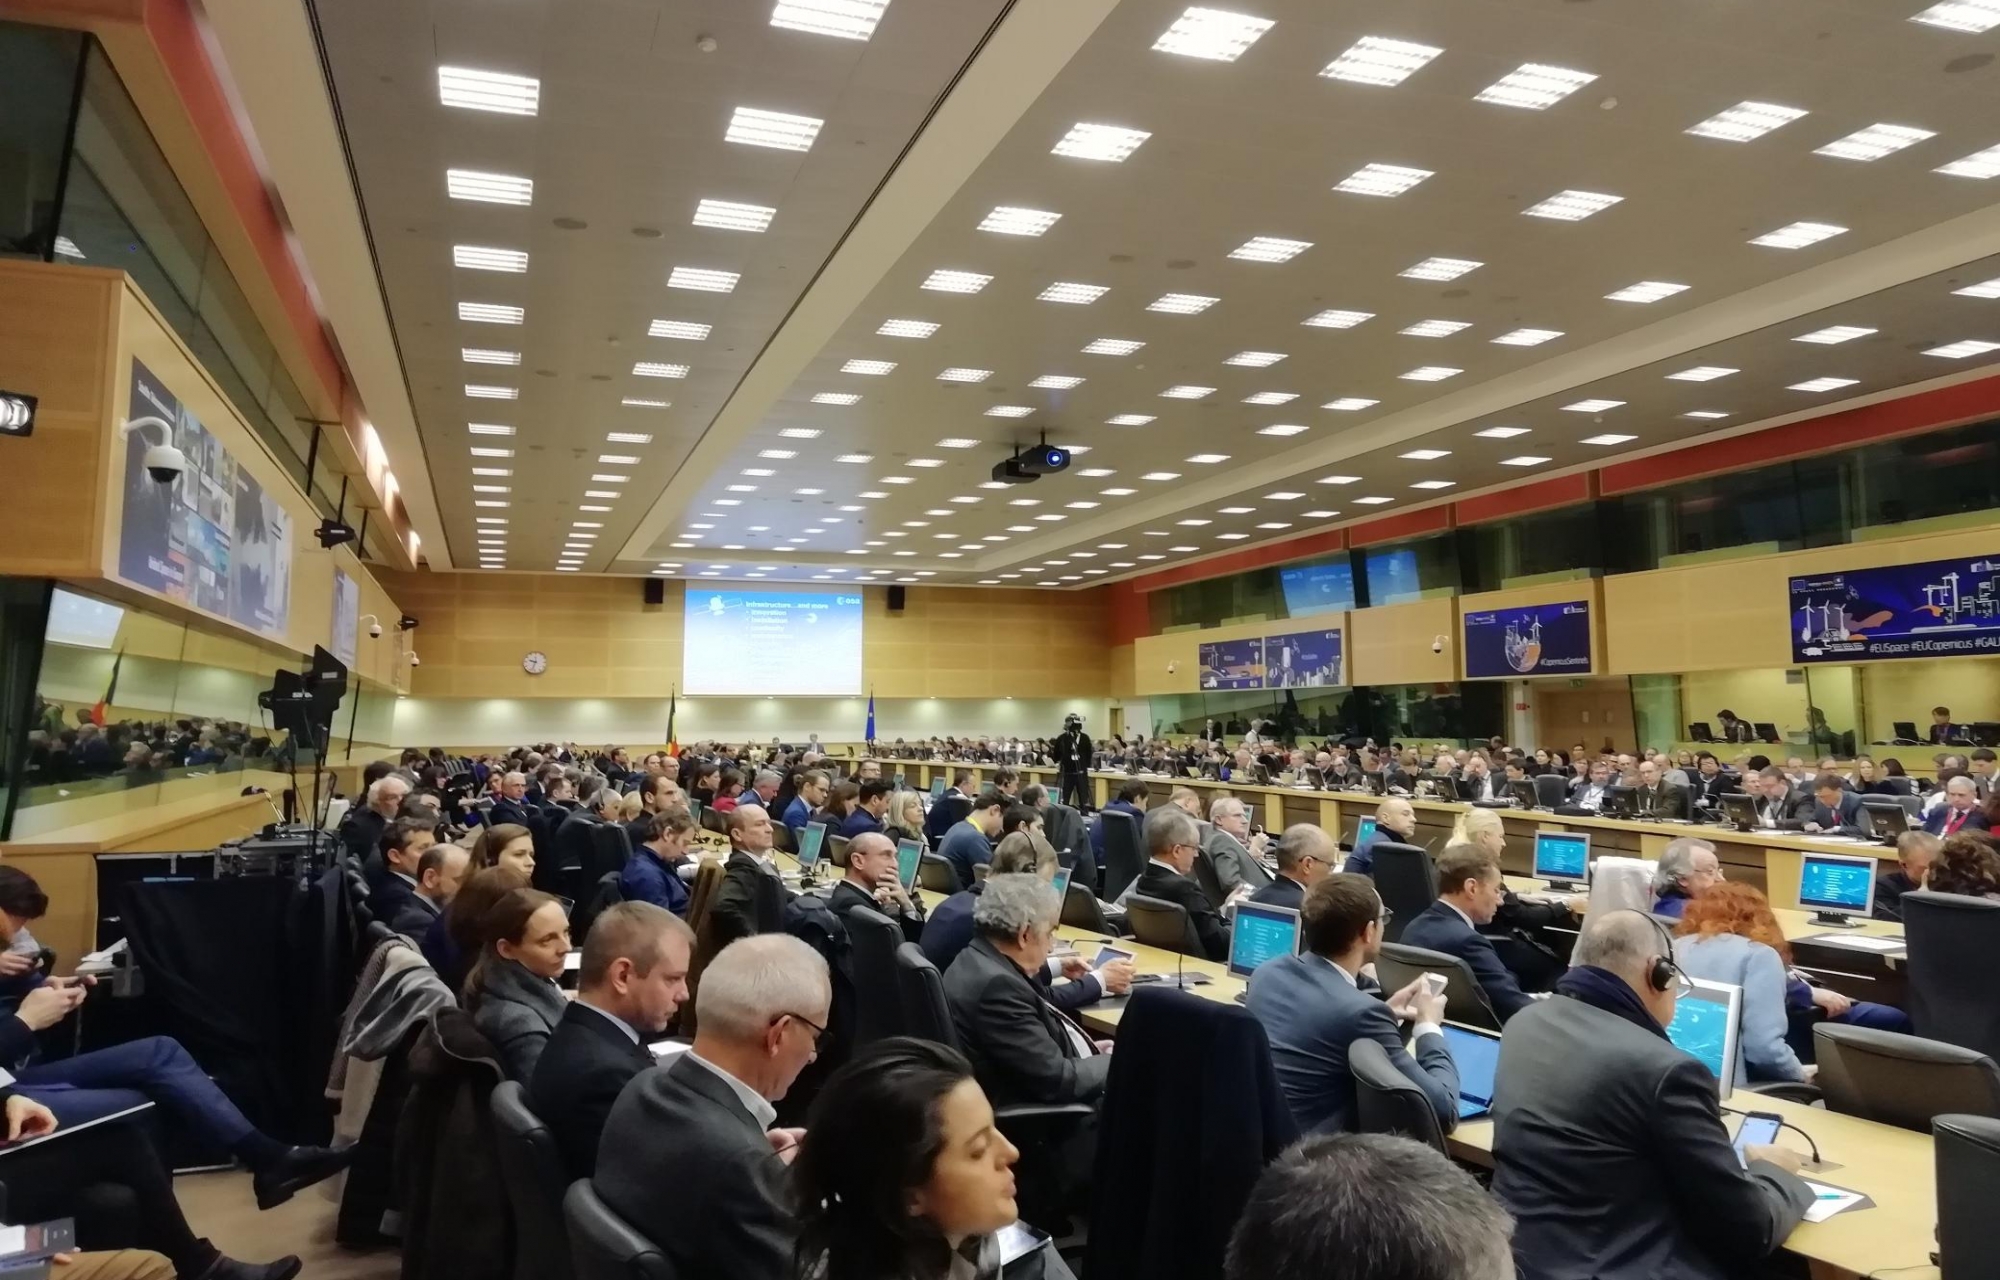 11th Annual Conference on European Space Policy - Brussels 22 &23 January 2019.